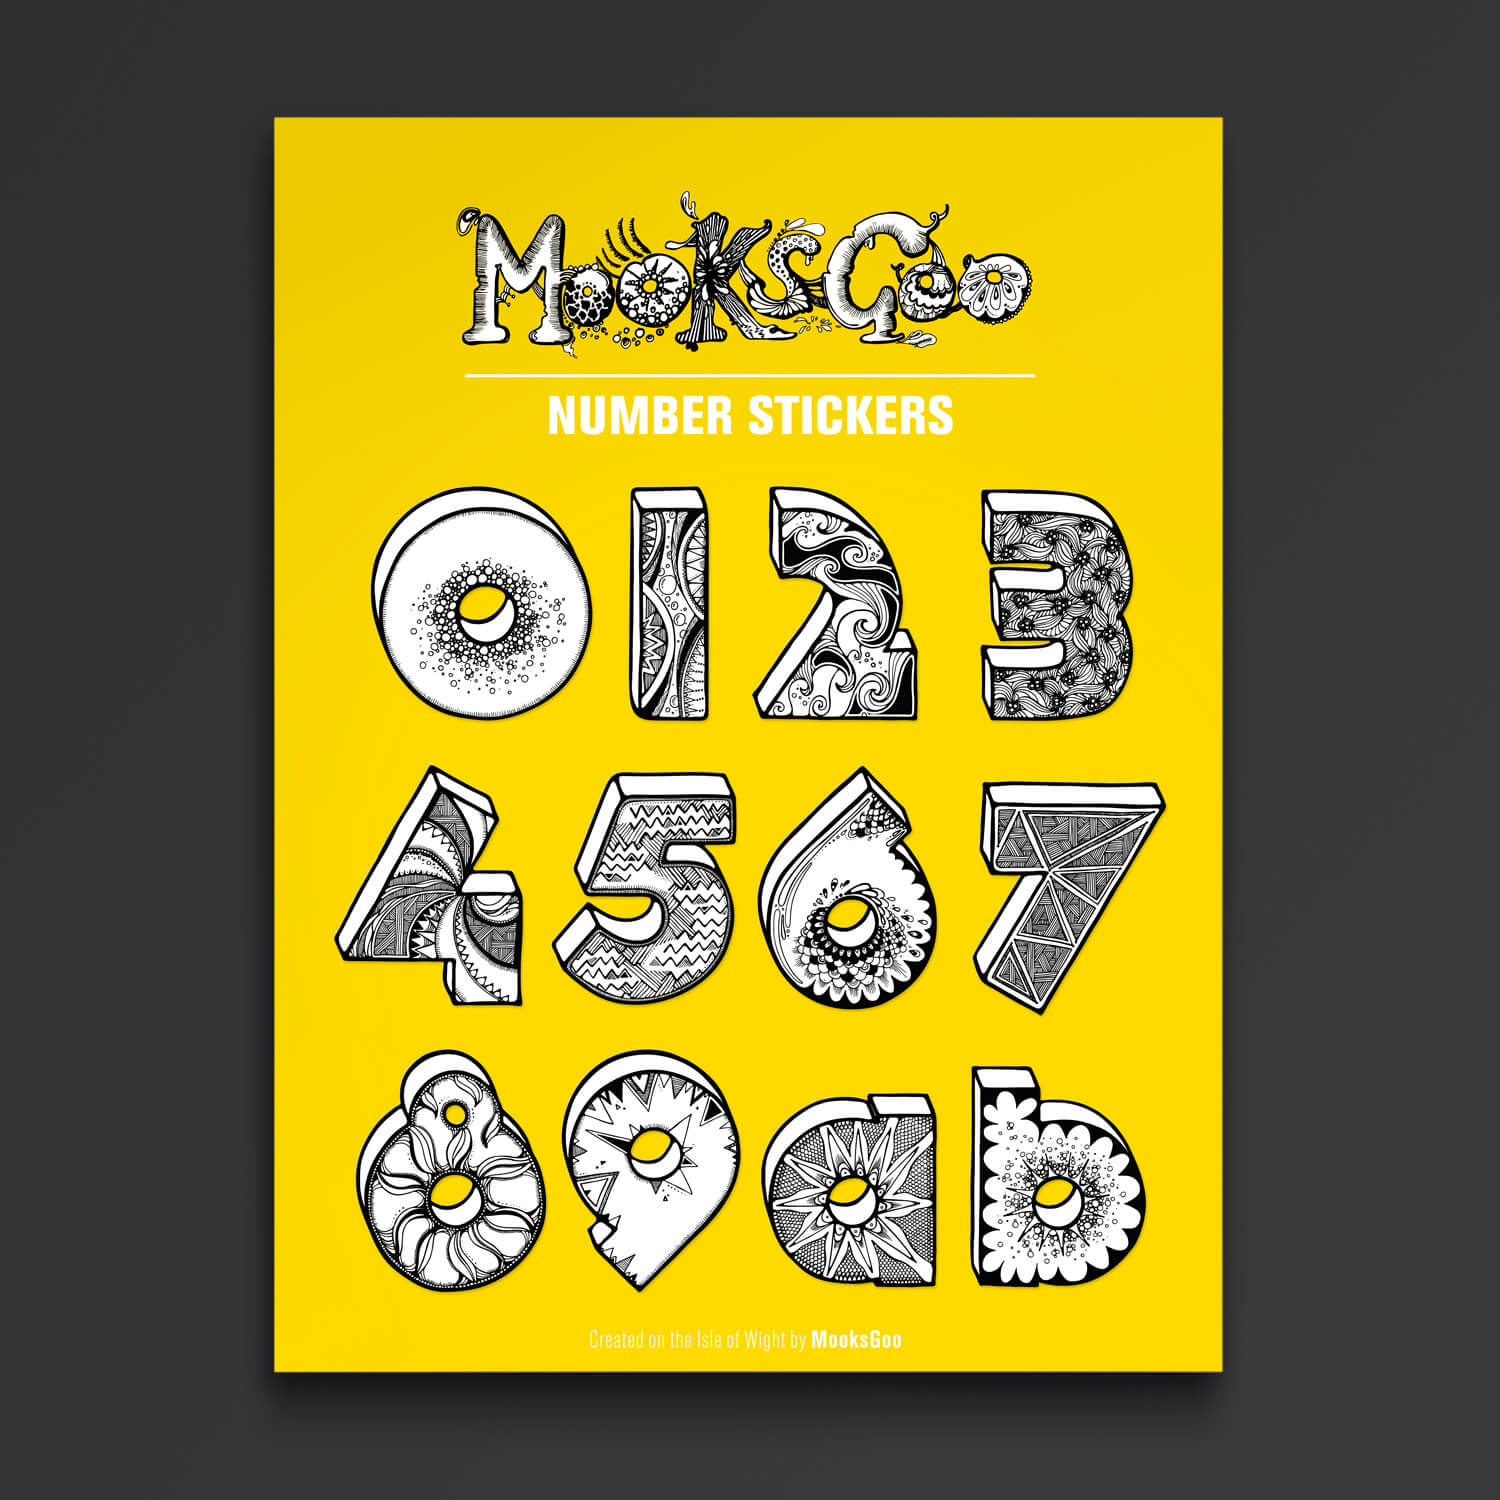 quirky, bright and bold house number stickers for wheelie bins, recycling bins, food bins, designed and illustrated by MooksGoo